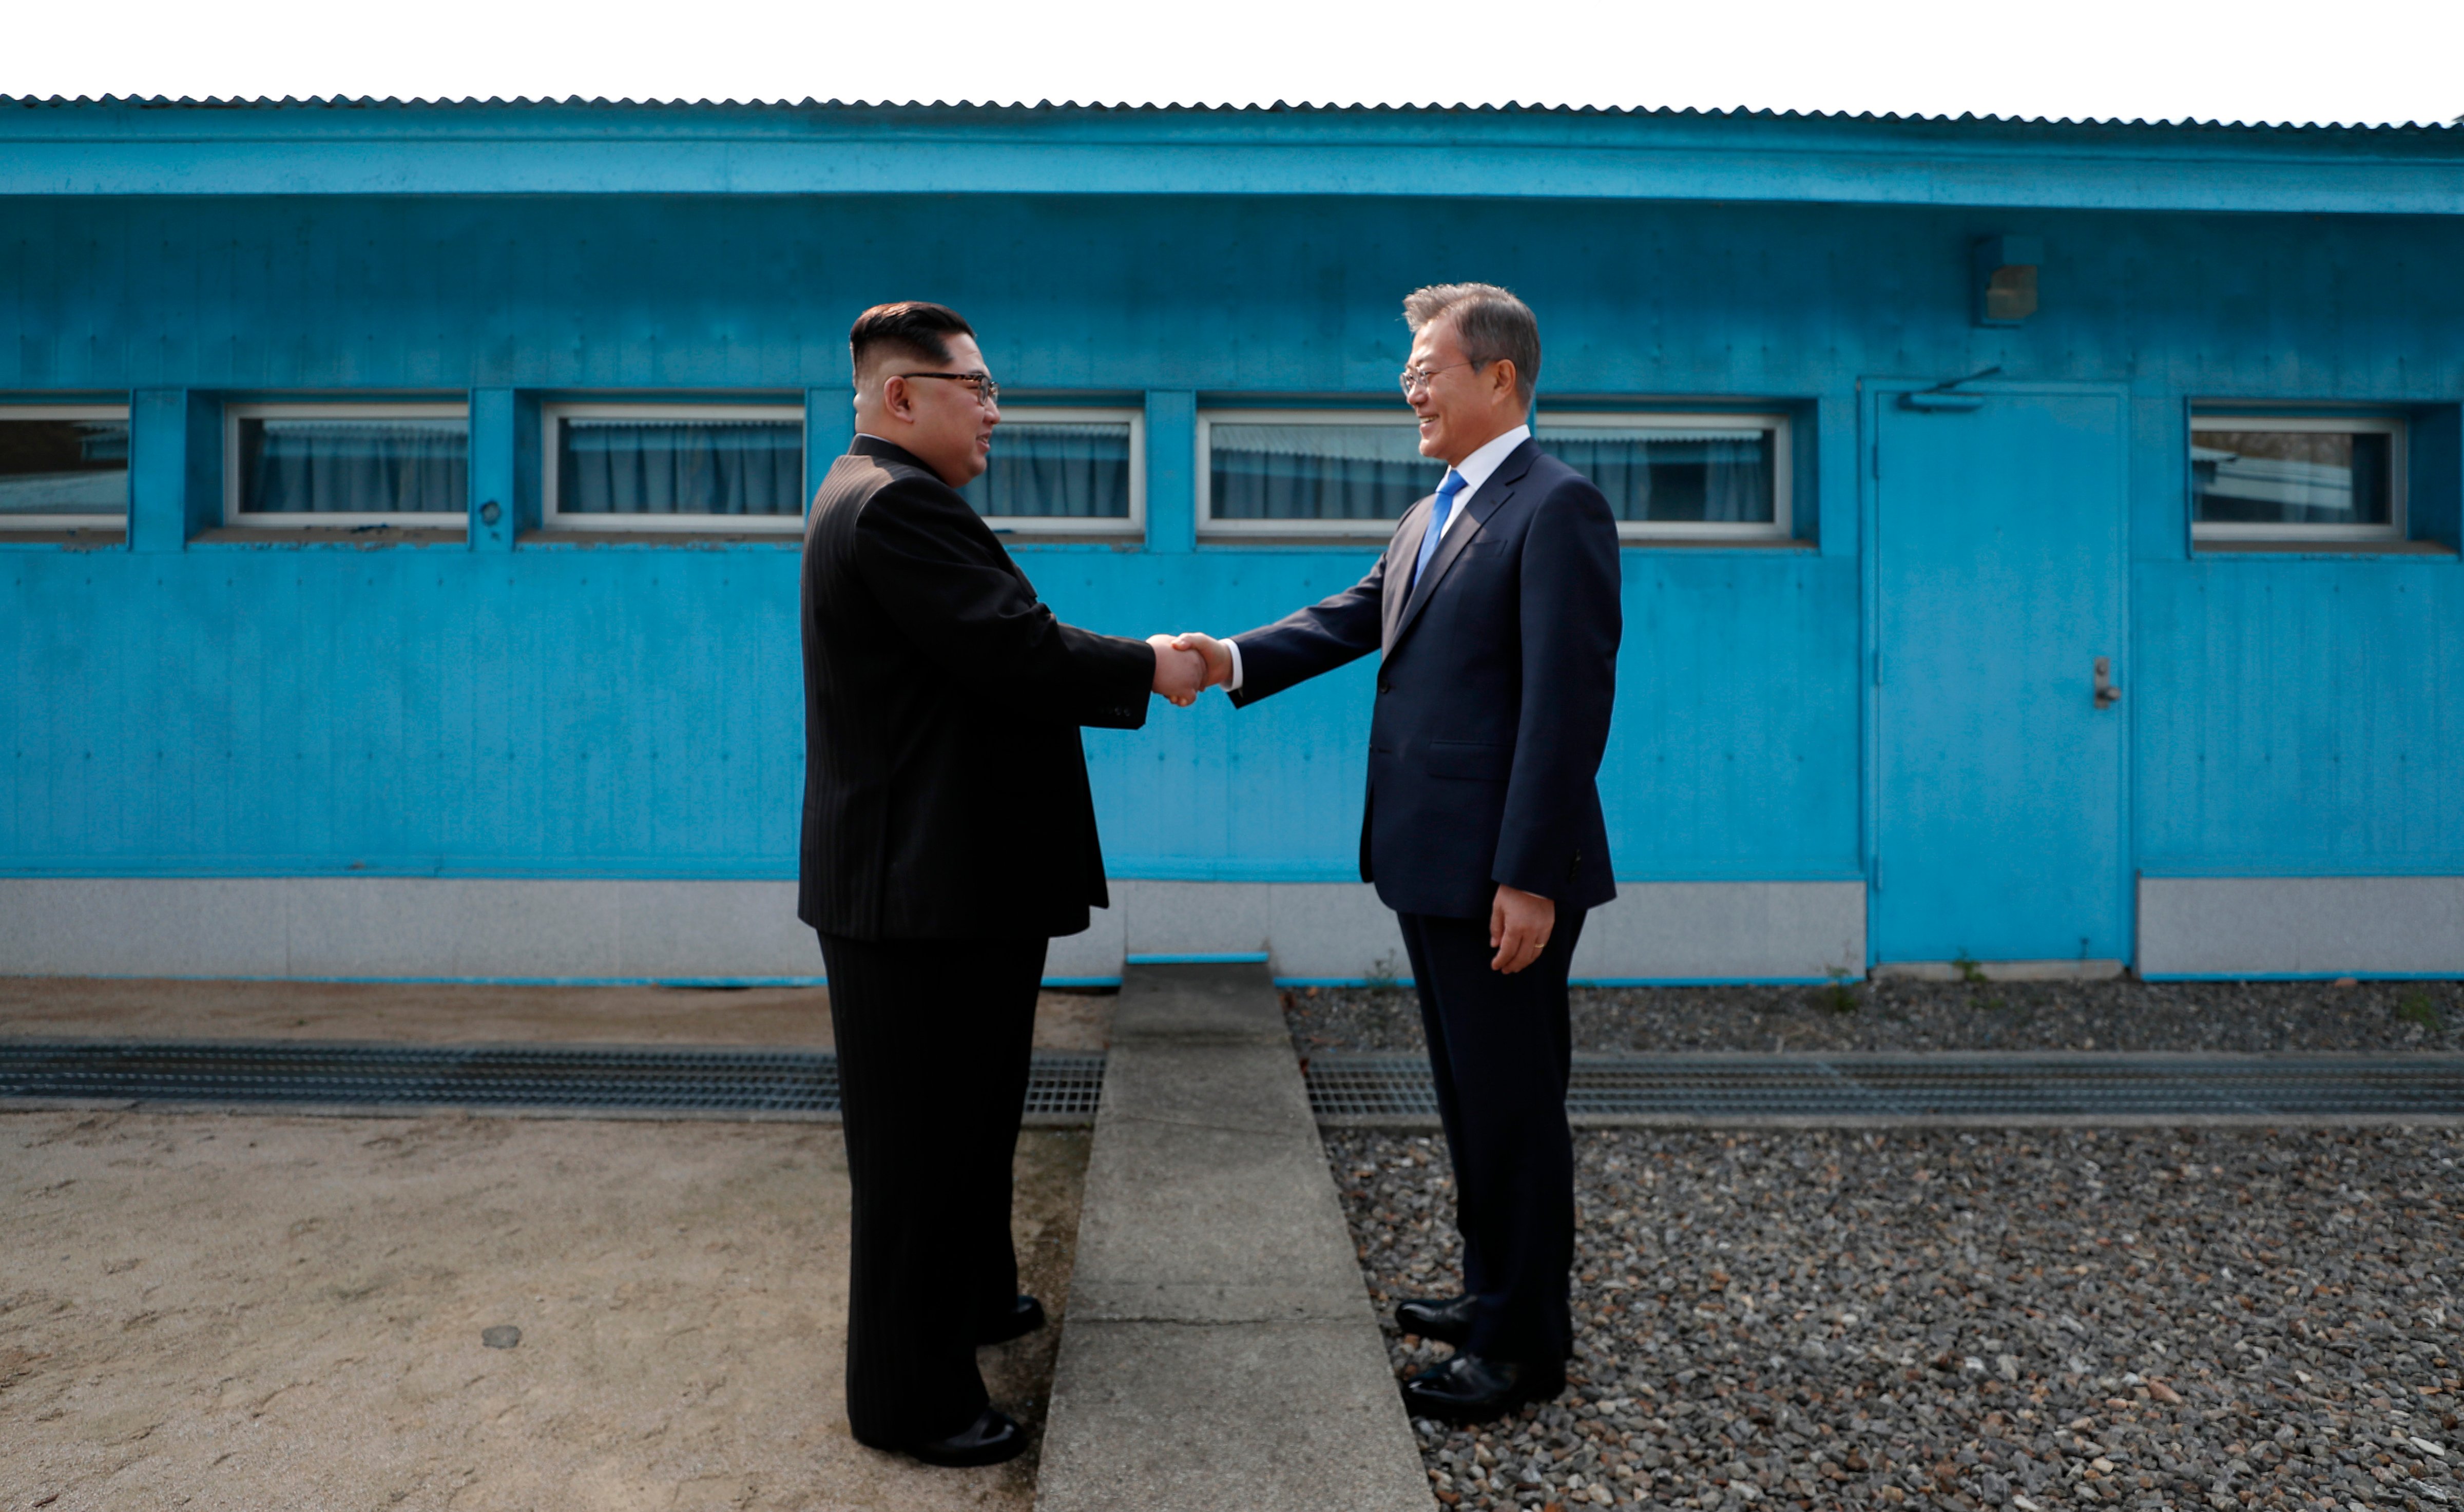 North Korea's leader Kim Jong Un shakes hands with South Korea's President Moon Jae-in at the Military Demarcation Line that divides their countries ahead of their summit at the truce village of Panmunjom on April 27, 2018. (Korea Summit Press Pool—AFP/Getty Images)